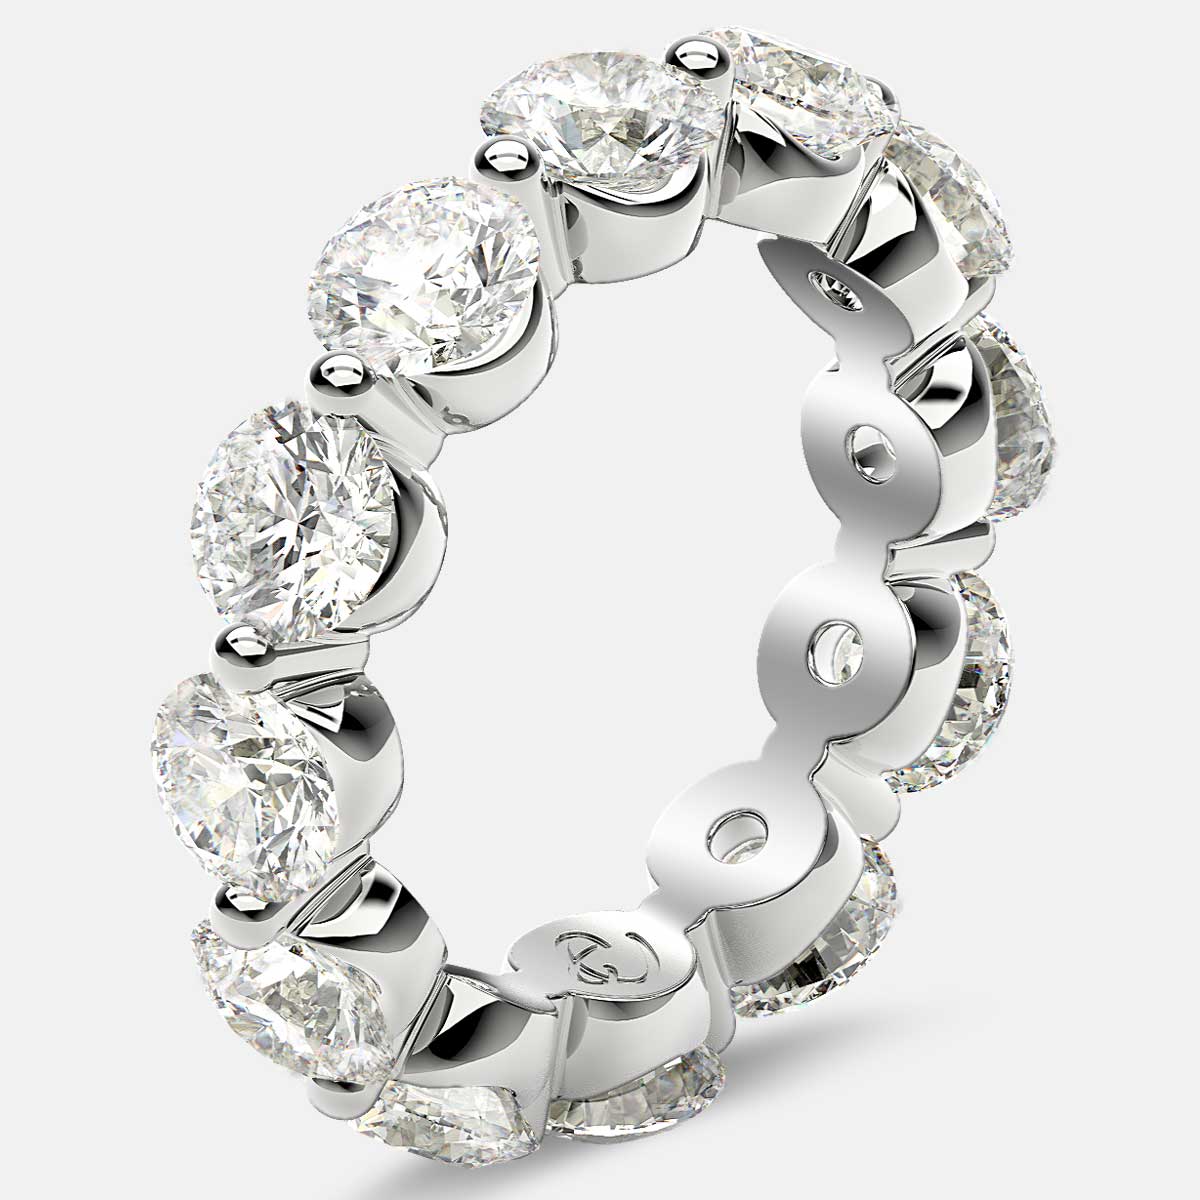 Floating Eternity Ring with Round Diamonds in Platinum